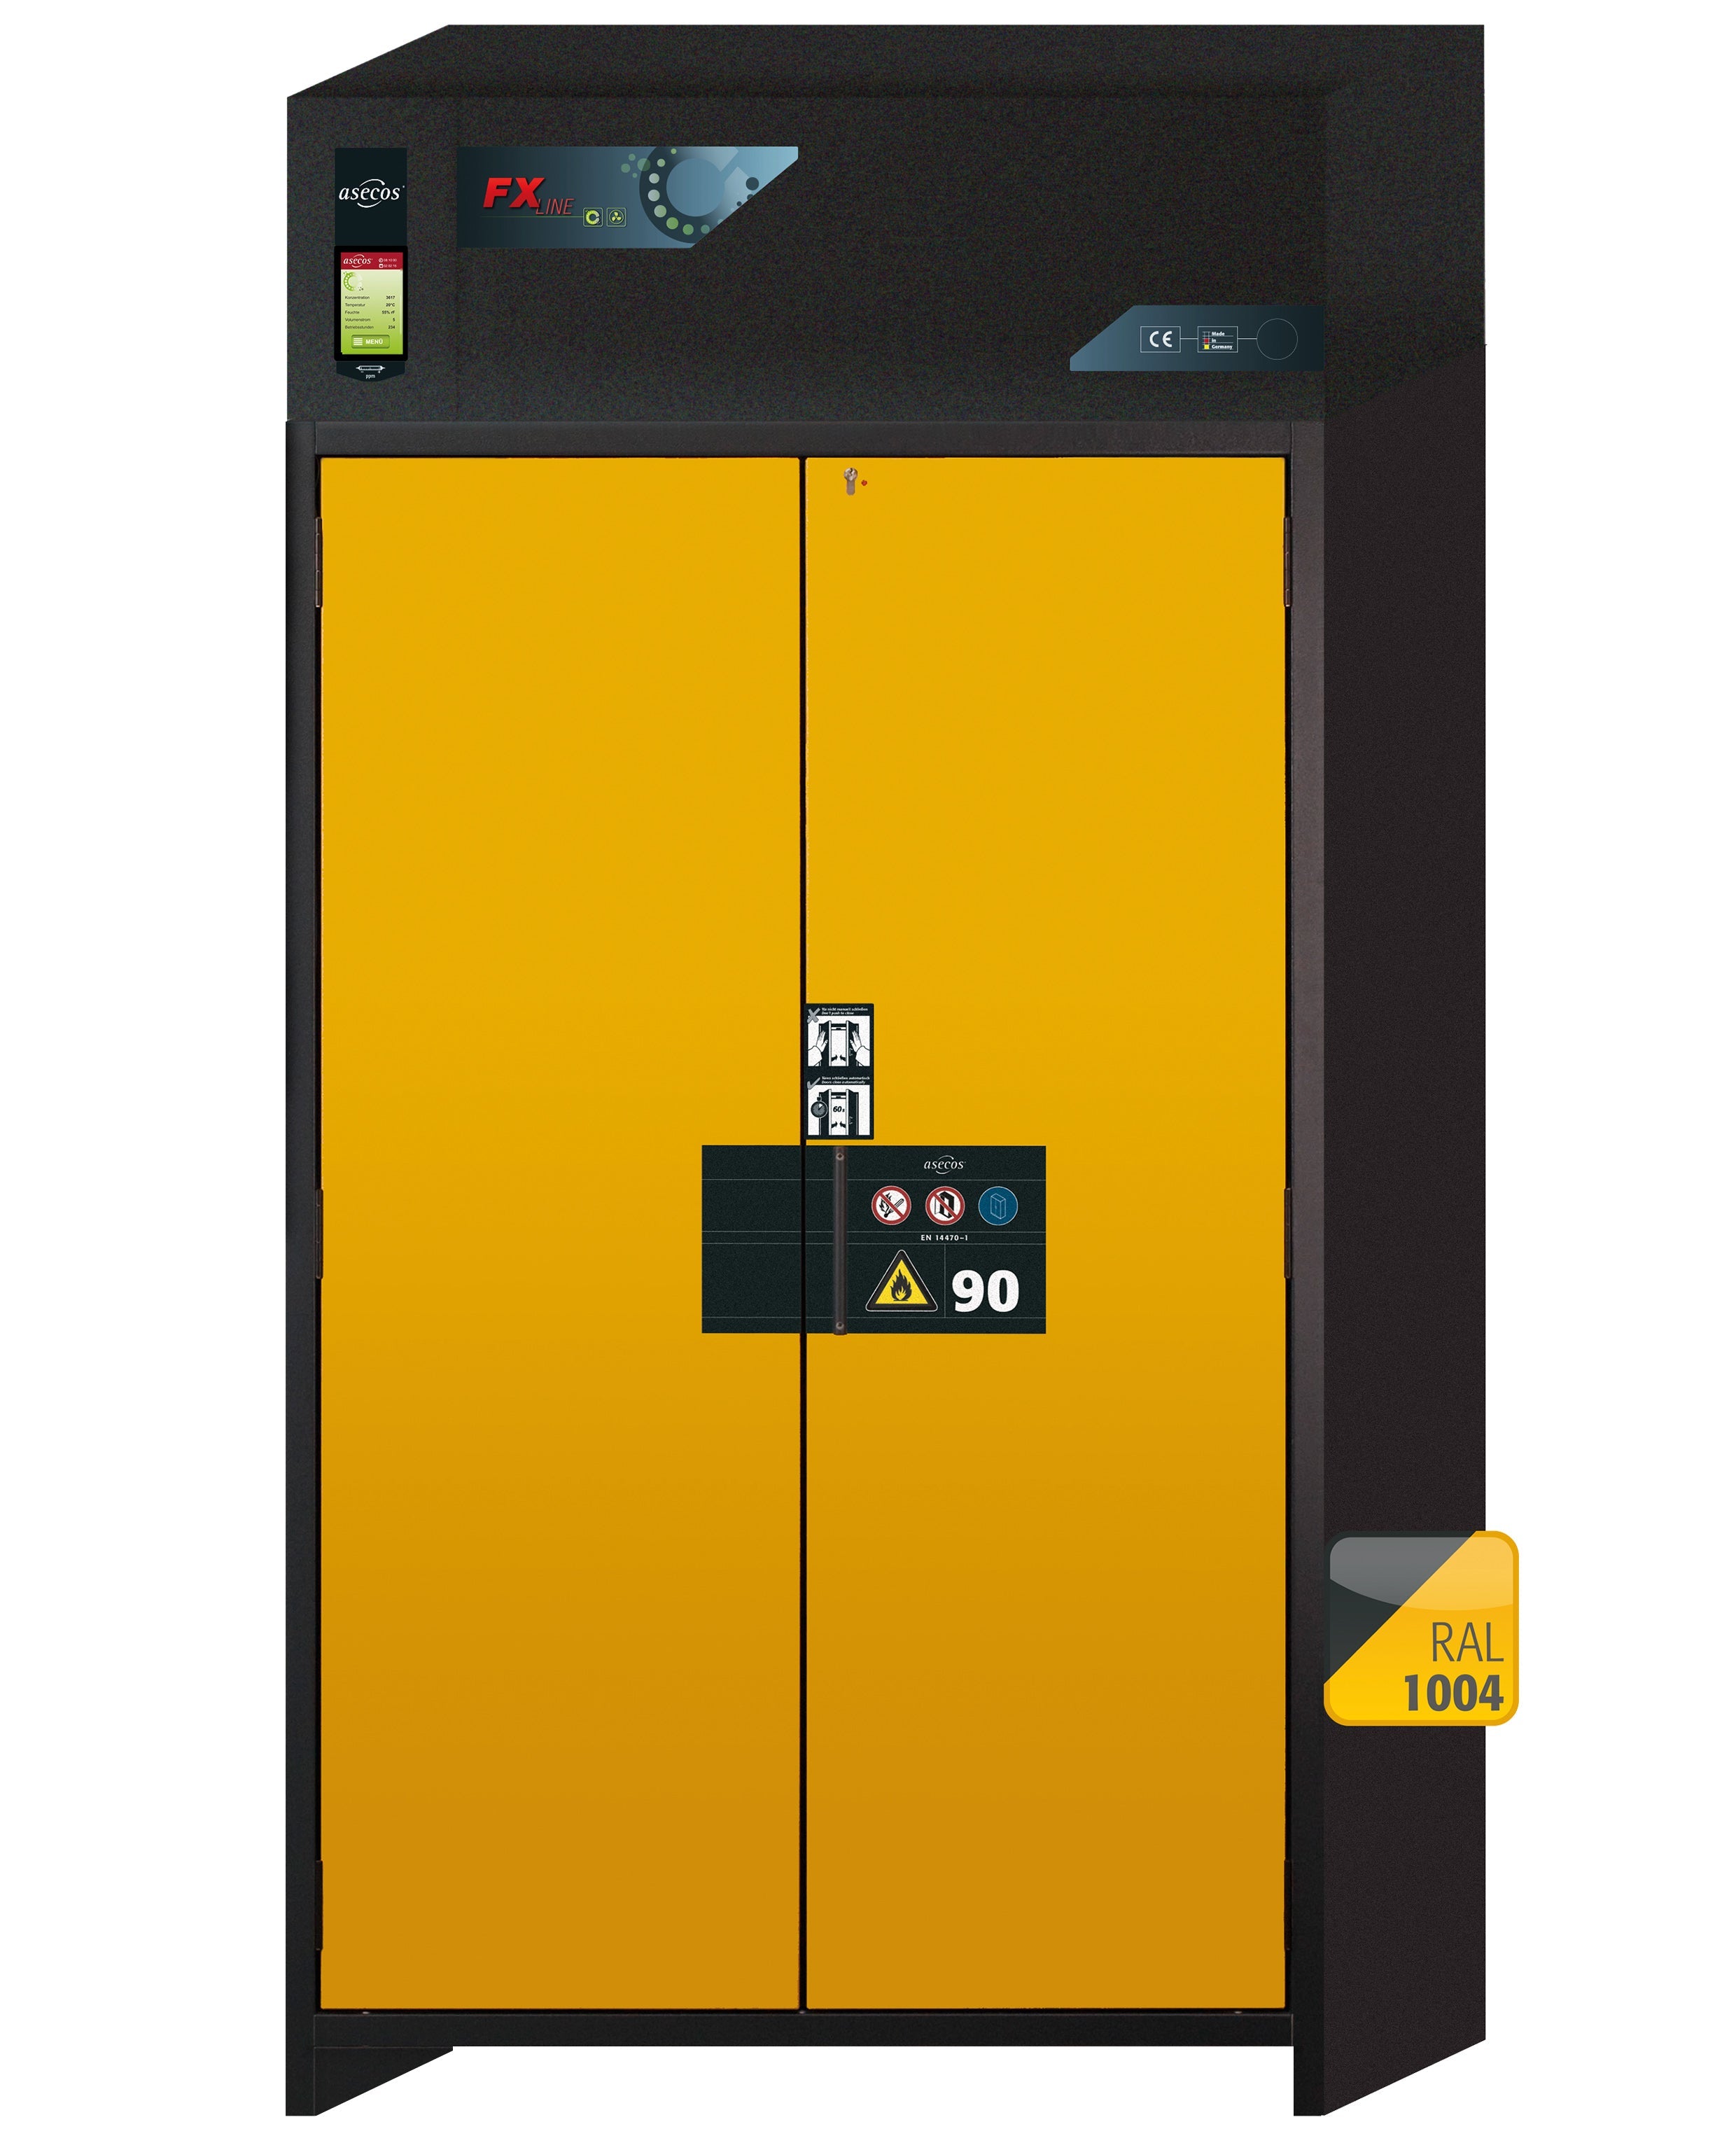 Type 90 recirculating air filter cabinet FX-PEGASUS-90 model FX90.229.120.WDAC in safety yellow RAL 1004 with 4x standard pull-out tray (stainless steel 1.4301)